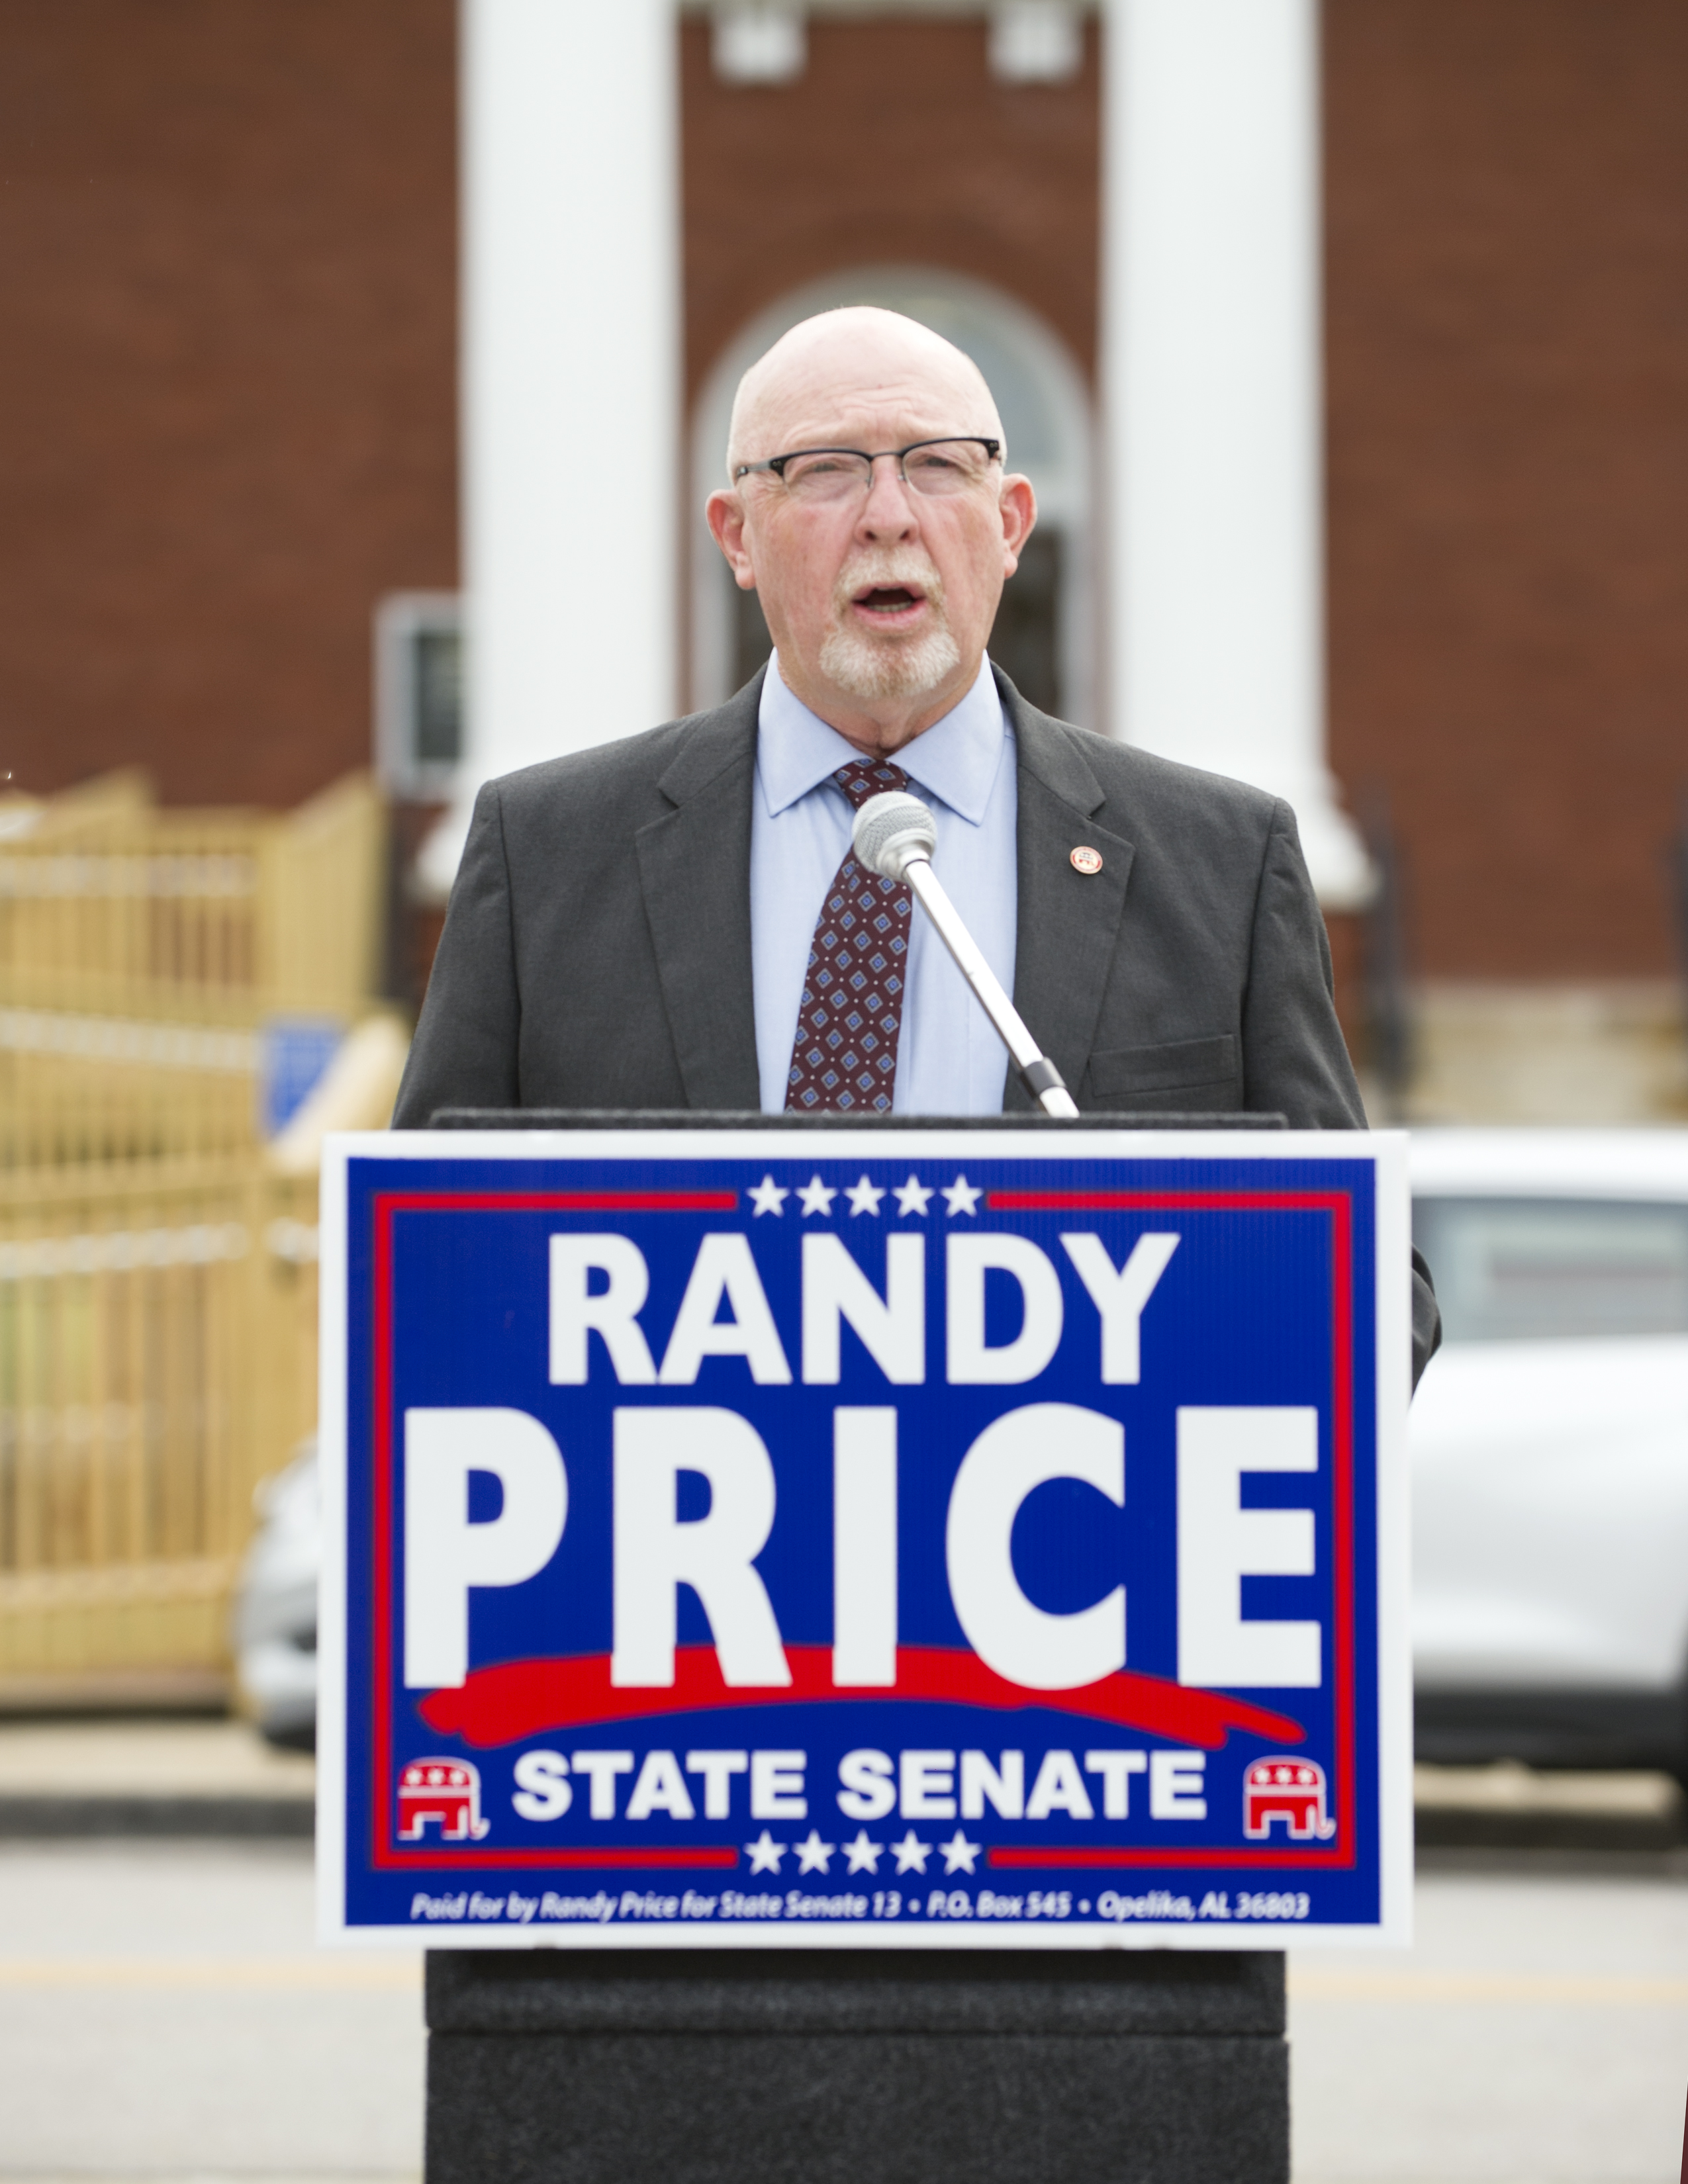 Price announces candidacy for state senate